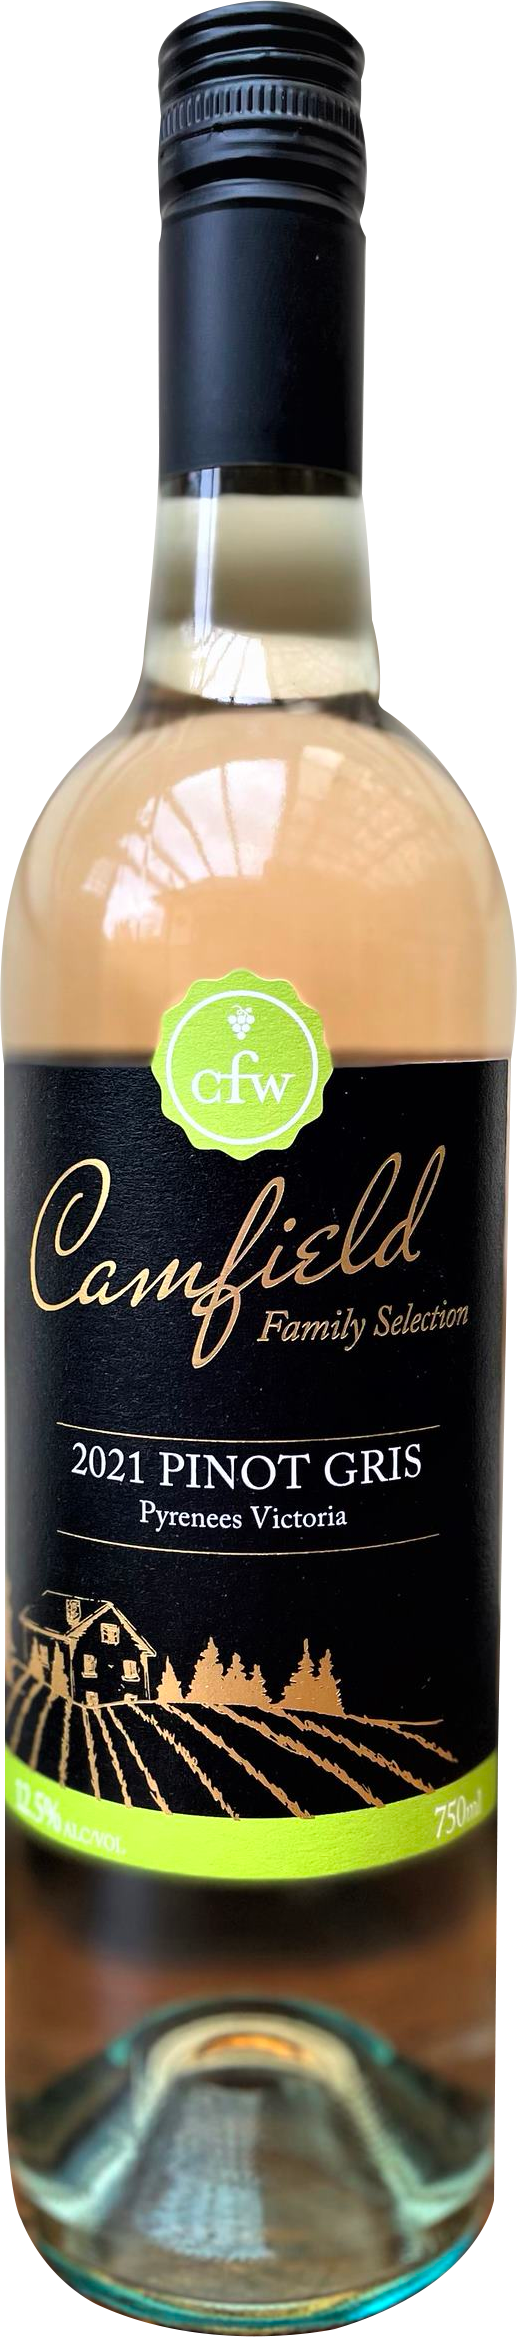 Camfield Family Selection-Pinot Gris 2021- 6 PACK